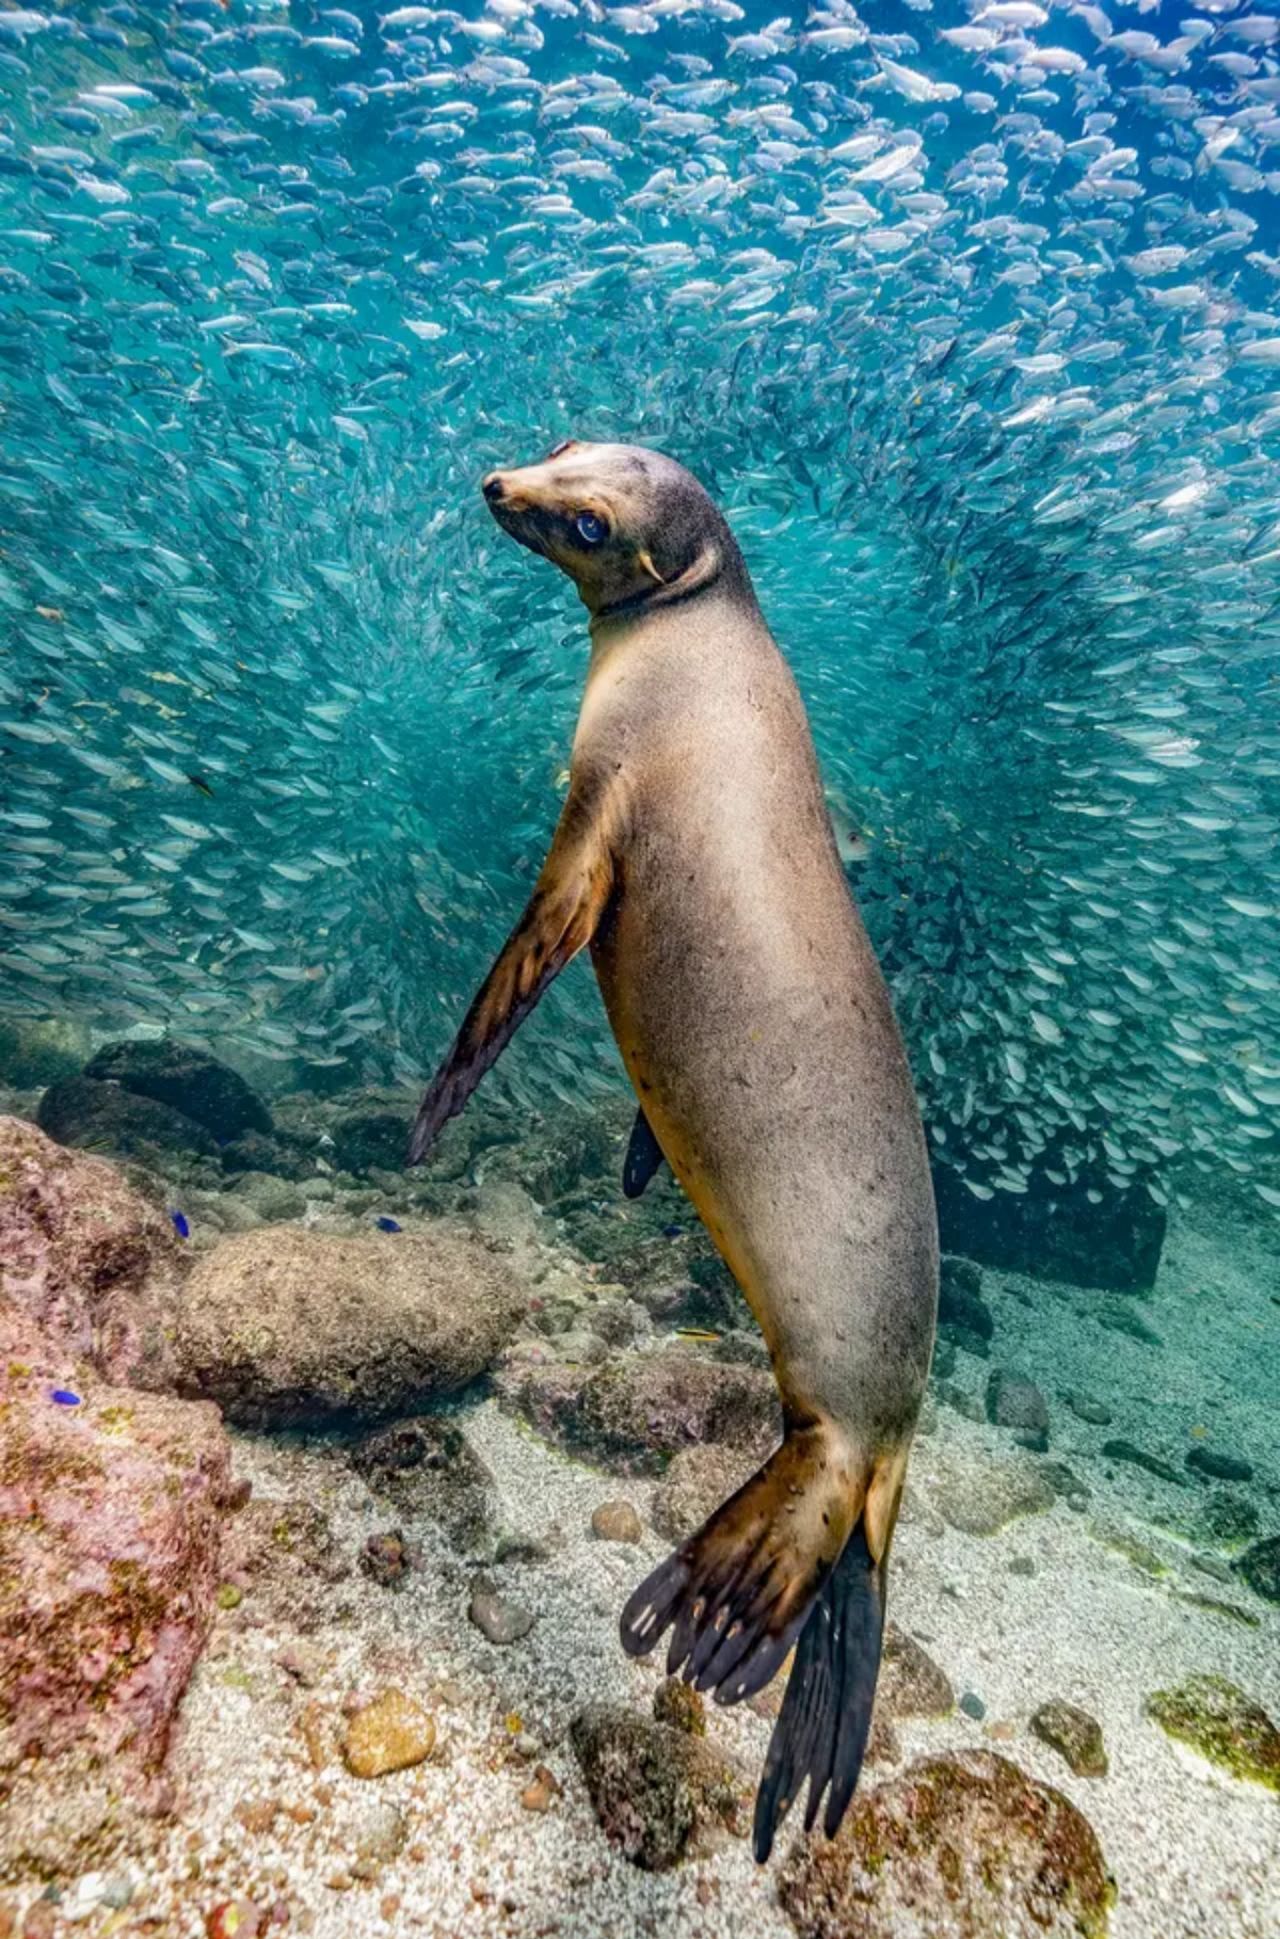 PHOTOGRAPHY OF THE YEAR - "Sea Lion in Los Islotes"